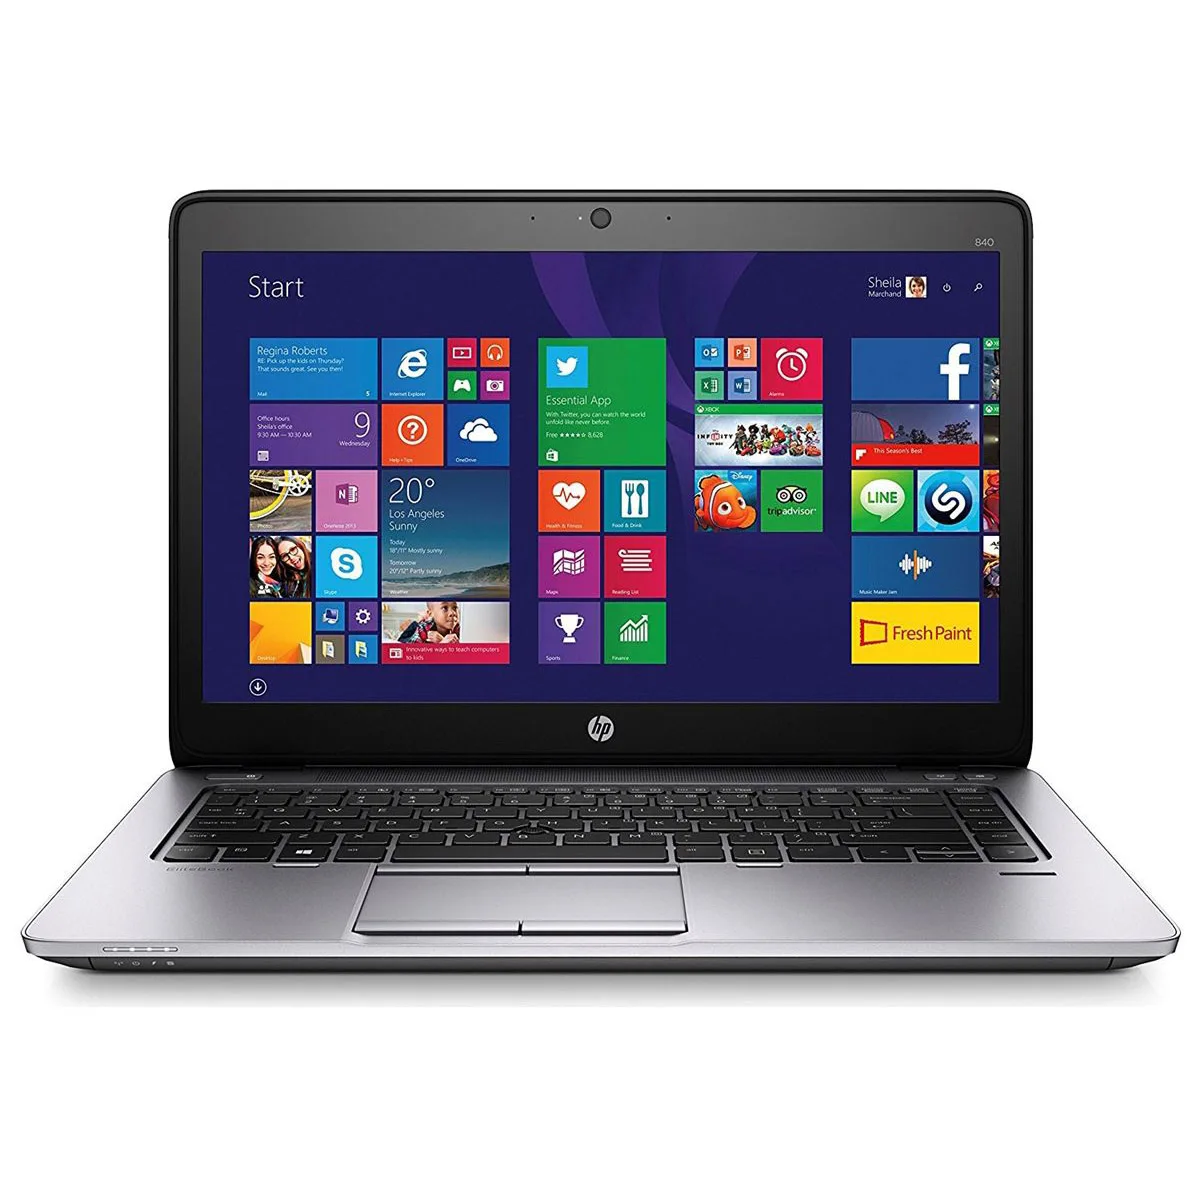 

AIWO Wholesale Multiple Brands Cheap Old Laptops Core I3 I5 I7 Gaming Office Second Hand Used Laptop Computers, According to the product